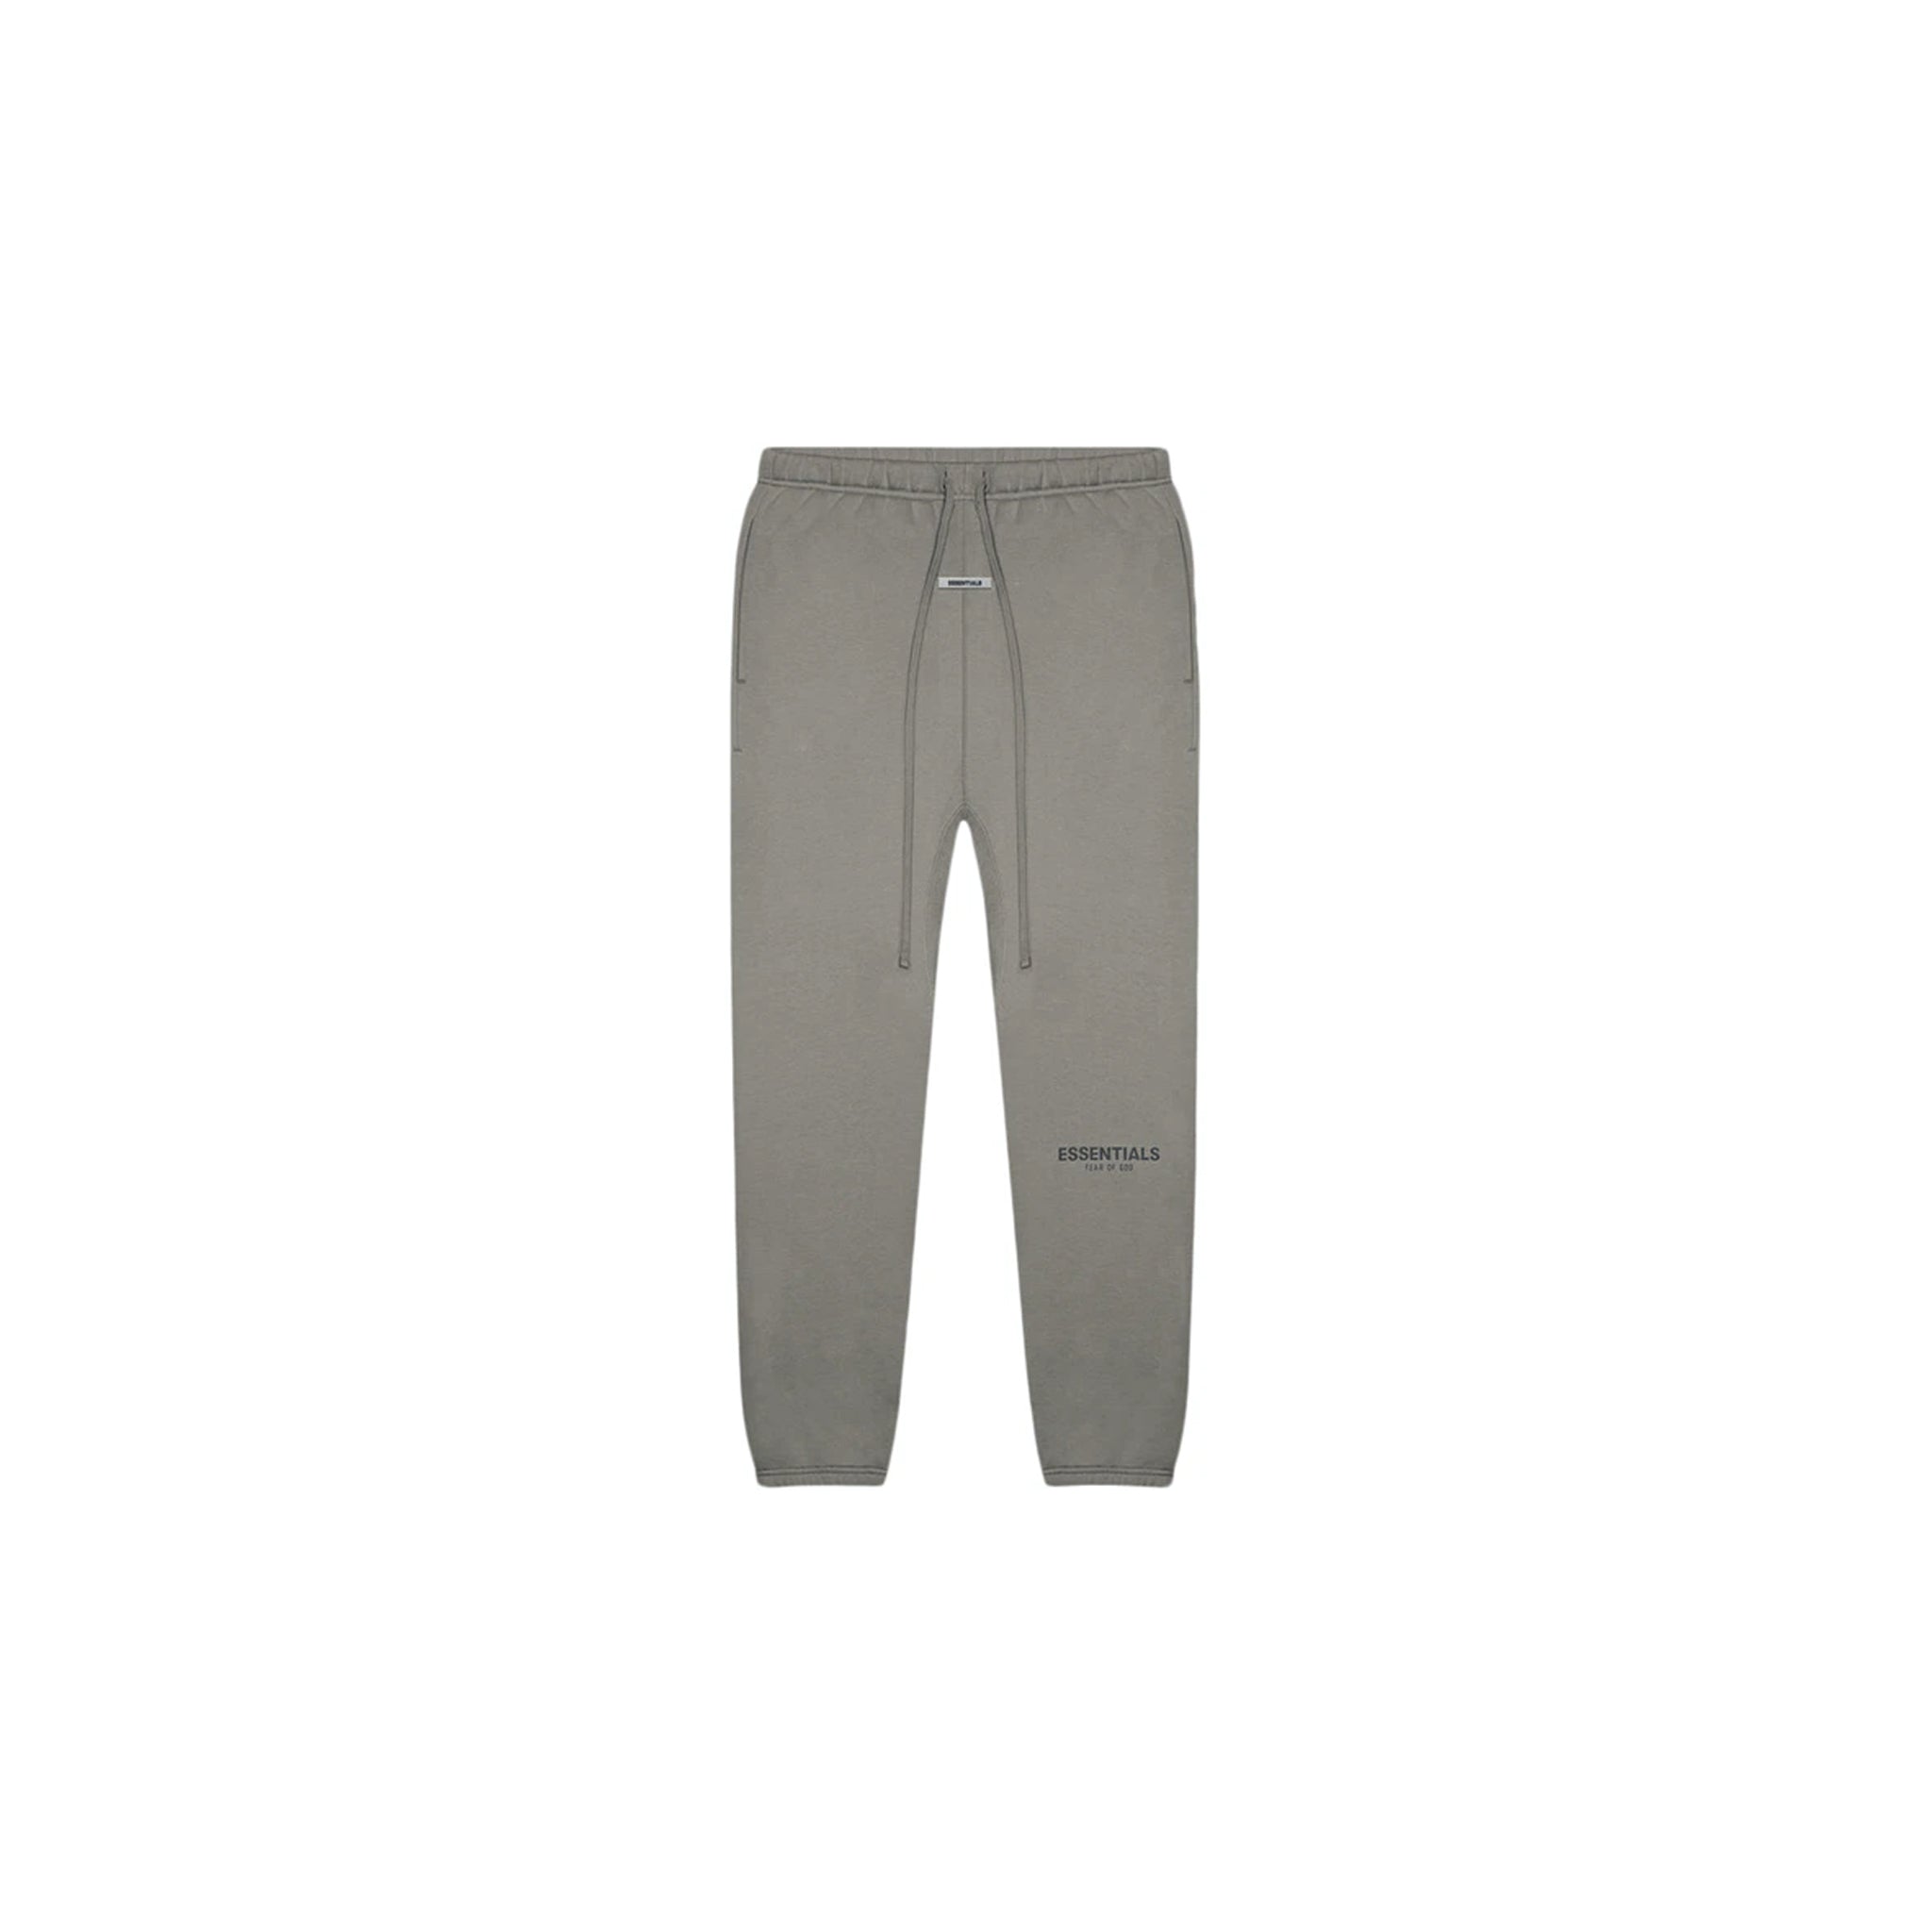 FEAR OF GOD ESSENTIALS SWEATPANTS (SS20) GRAY FLANNEL/CHARCOAL